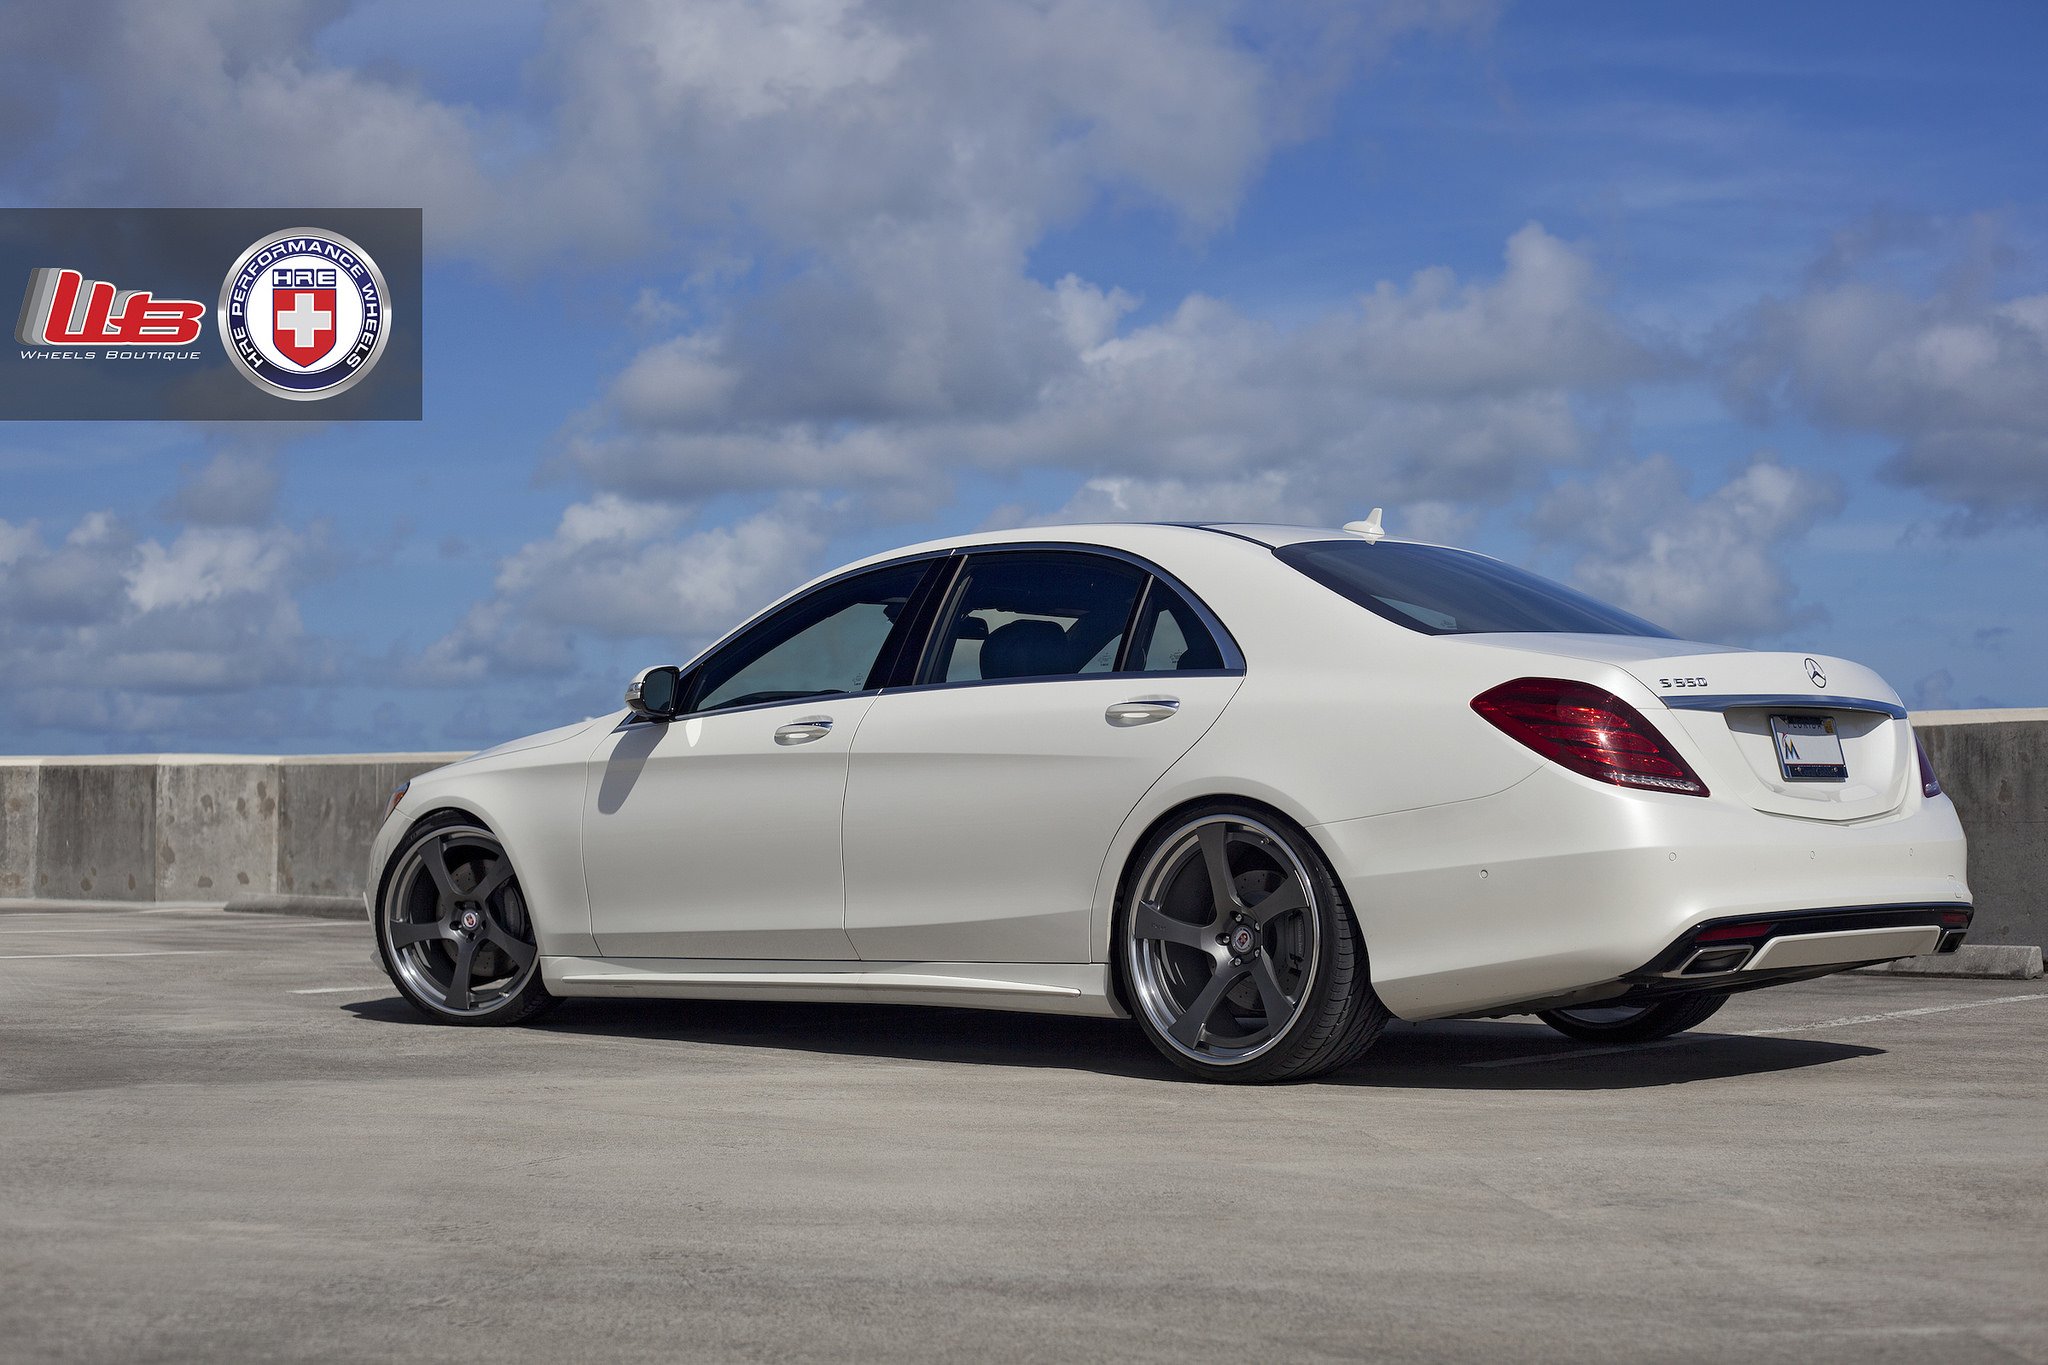 mercedes, S550, Hre, Cars, Tuning, Wheels, Cars Wallpaper